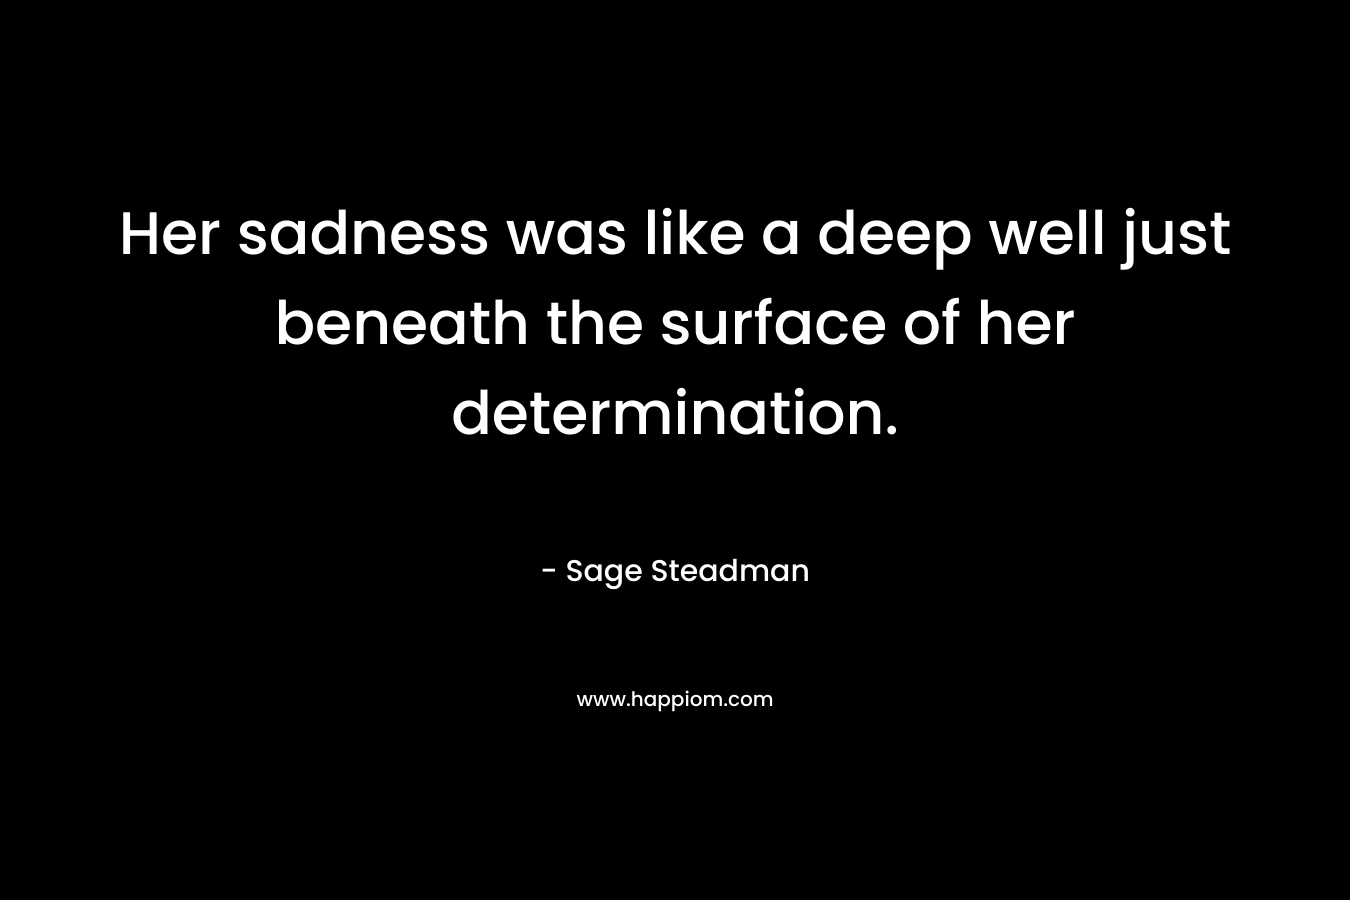 Her sadness was like a deep well just beneath the surface of her determination.